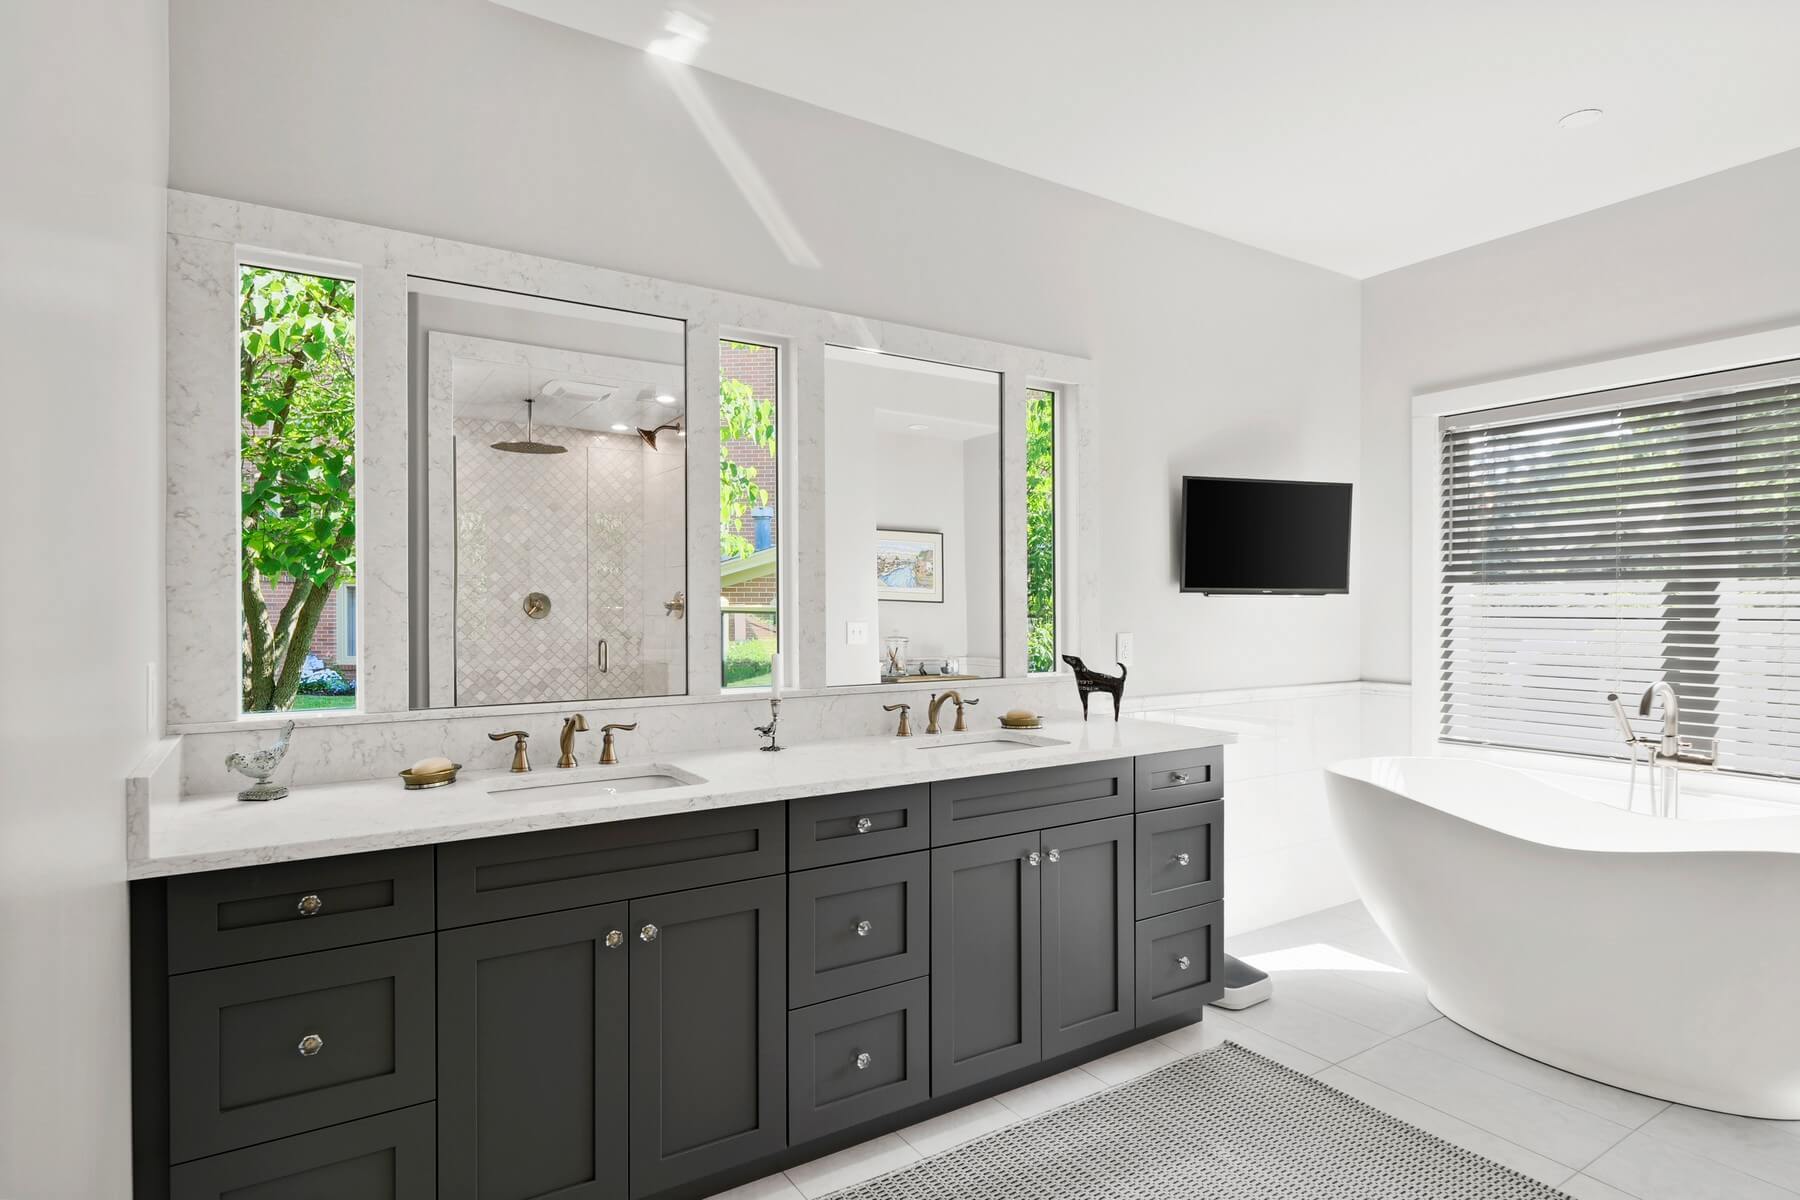 A master bathroom designed for two with a dark gray vanity with double sinks.